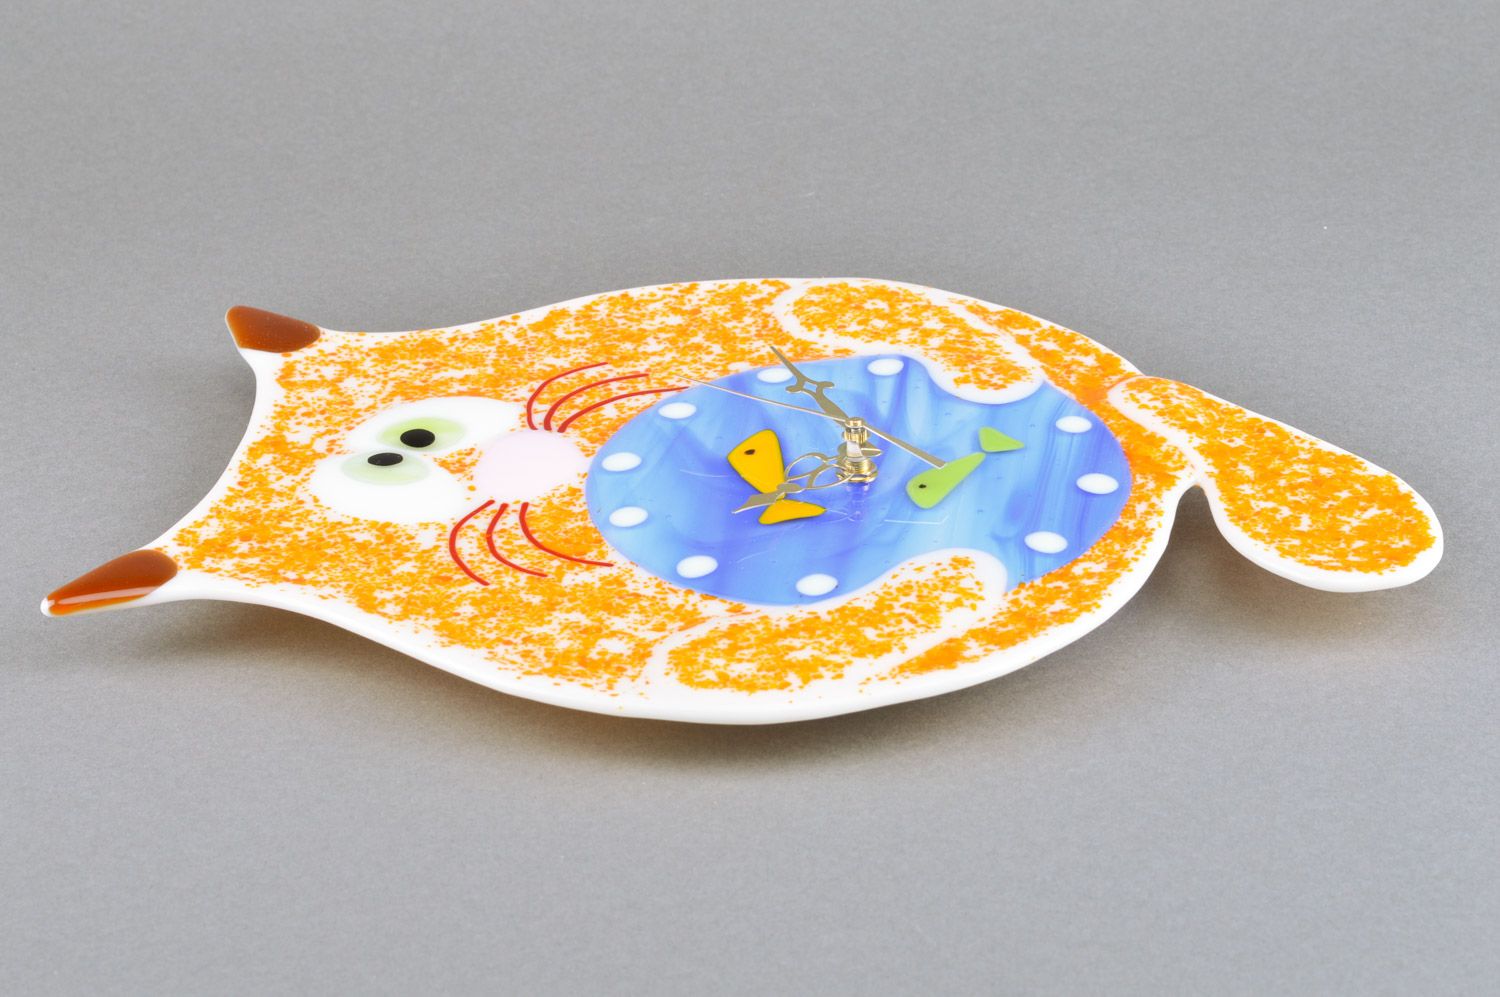 Funny handmade fused glass wall clock in the shape of fat cat for child's room photo 5